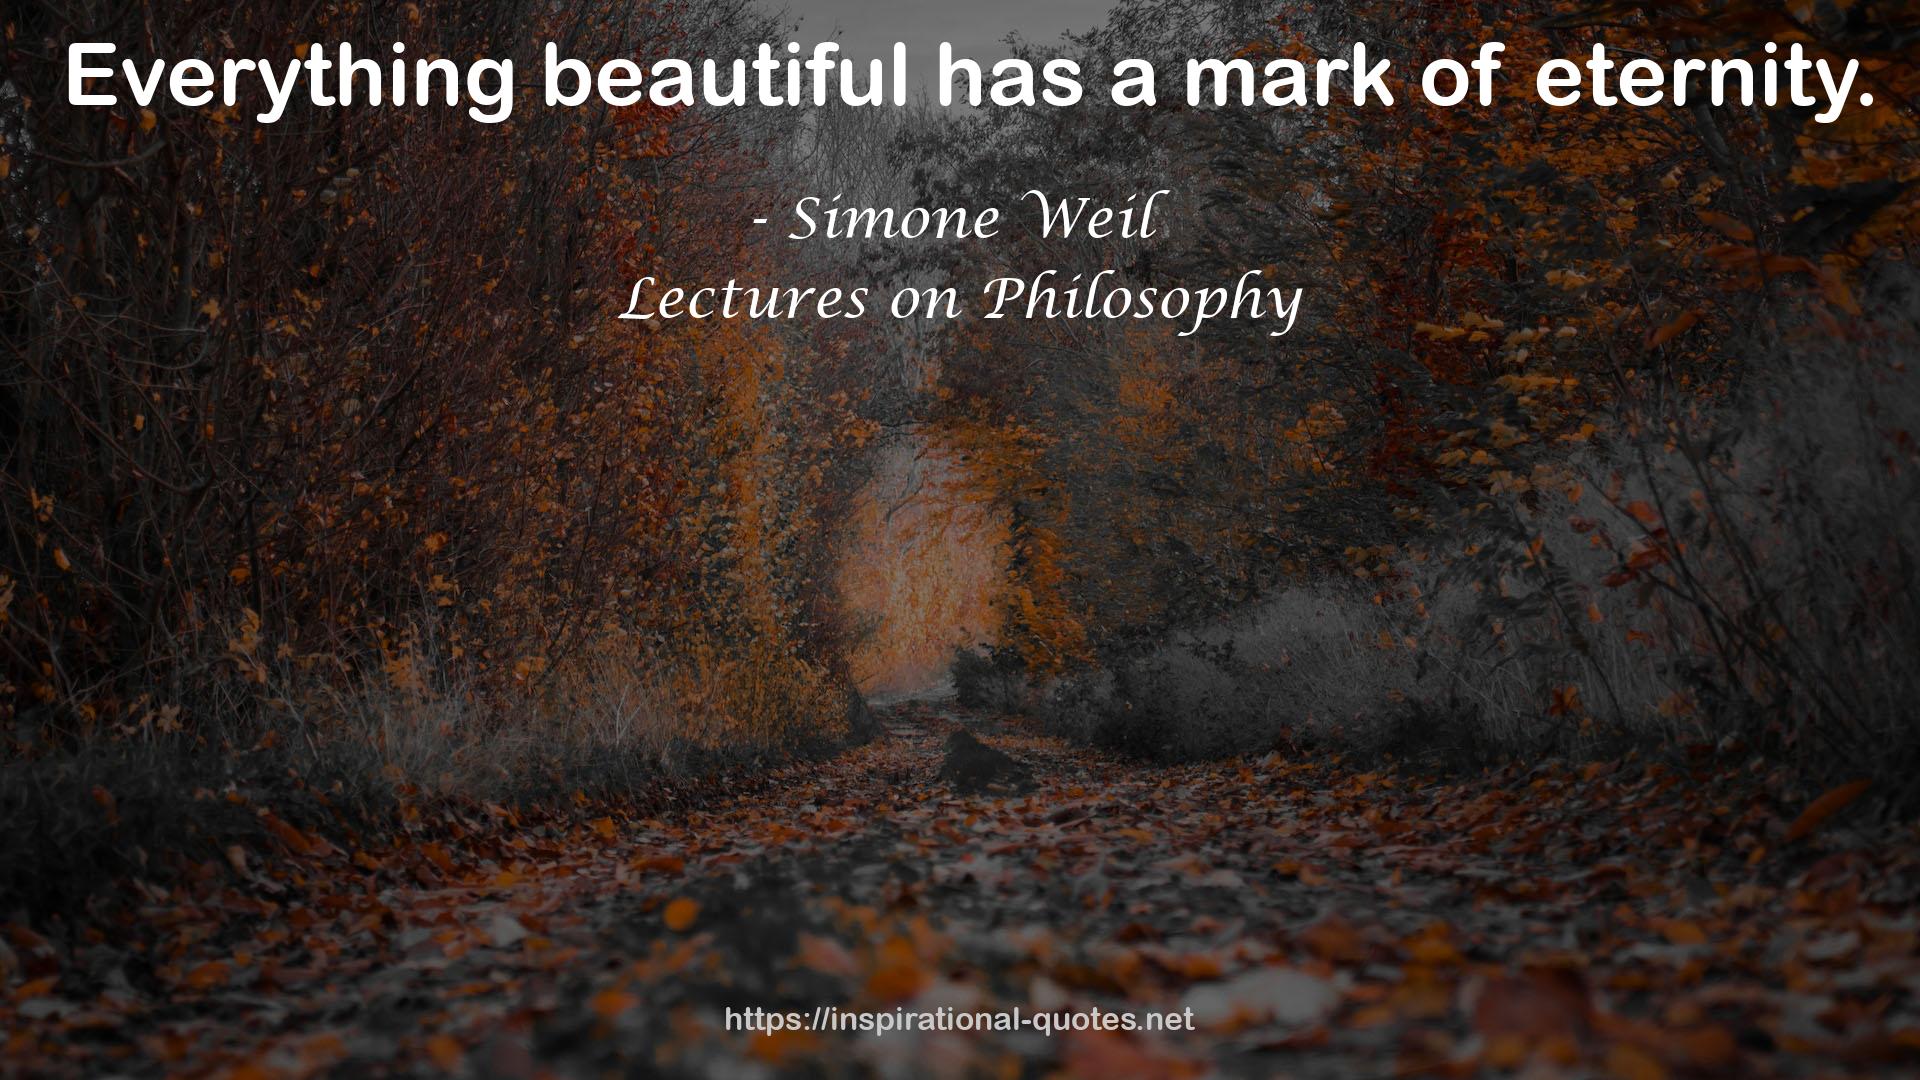 Lectures on Philosophy QUOTES